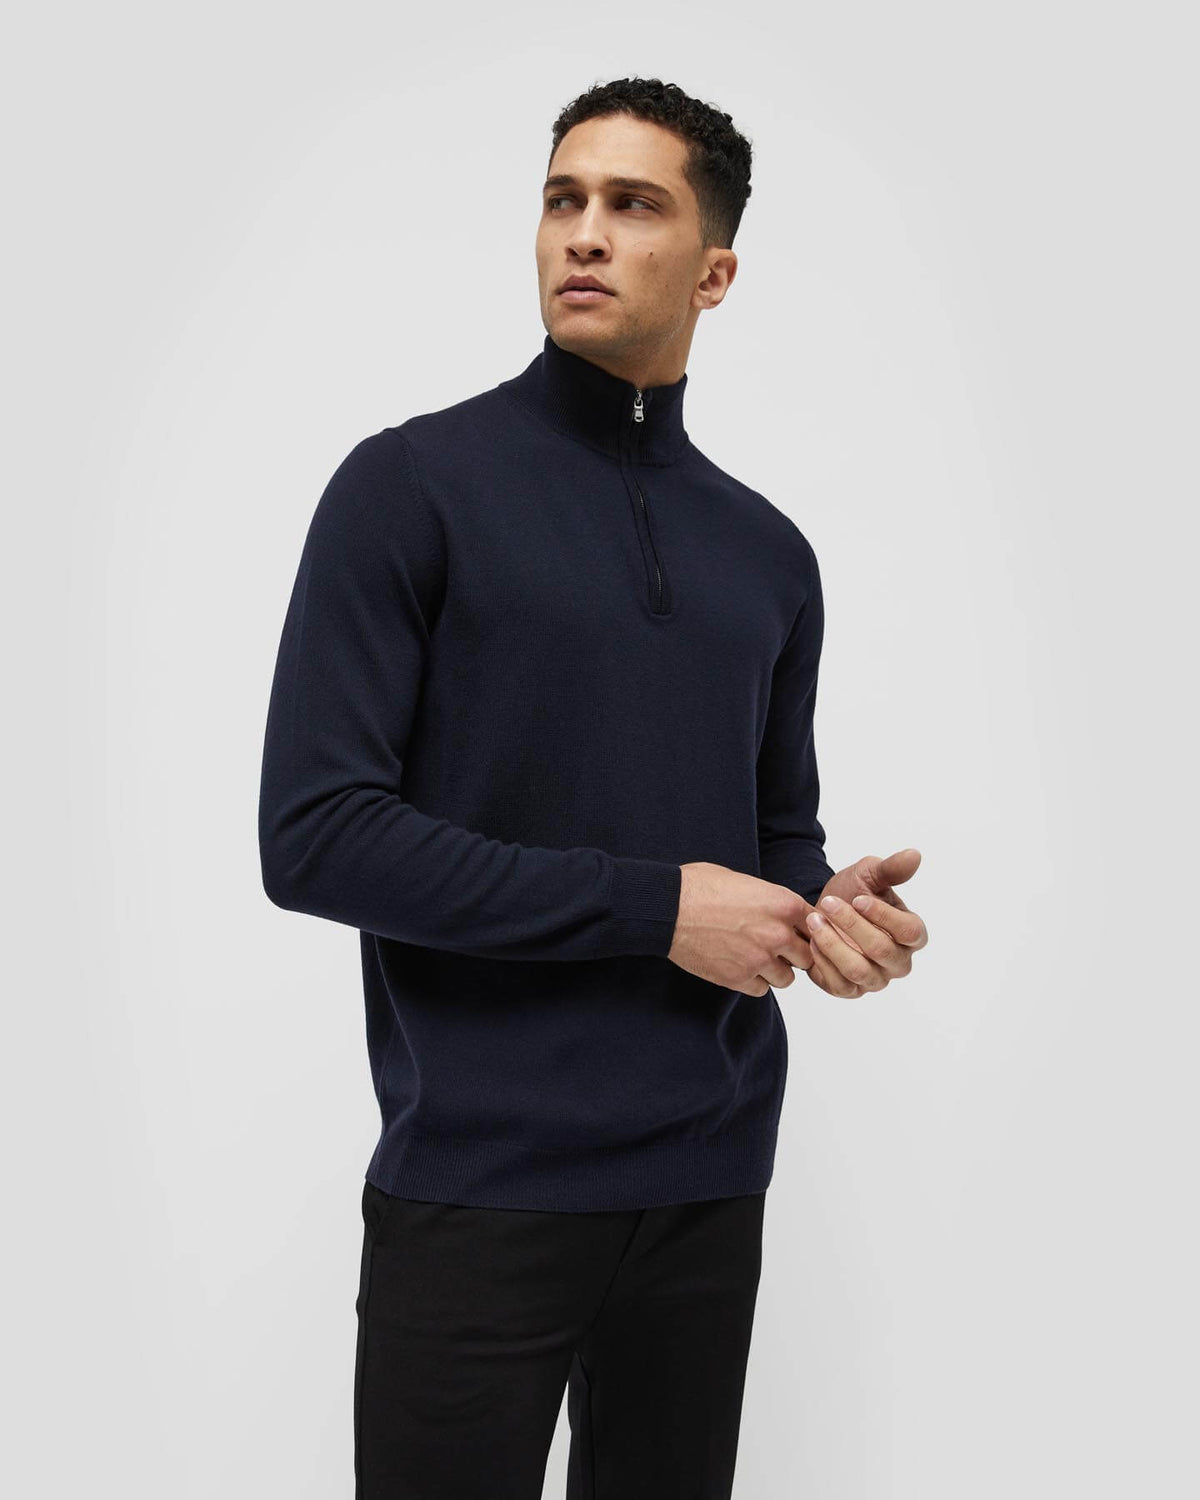 Trento Wool and Cashmere Unisex Half-Zip Pullover Sweater